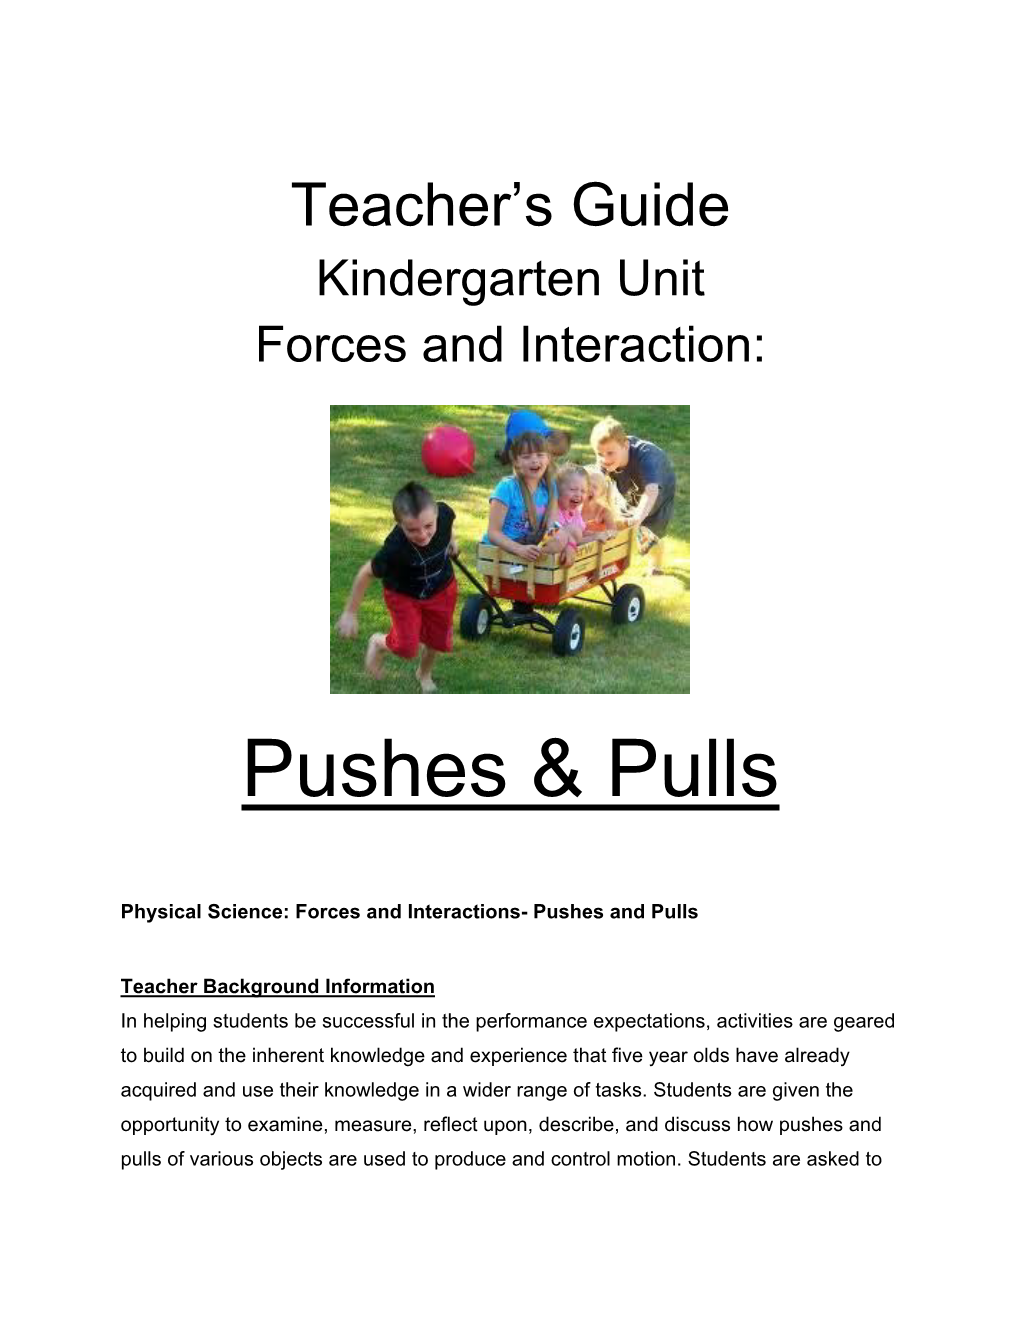 Forces and Interactions: Pushes and Pulls